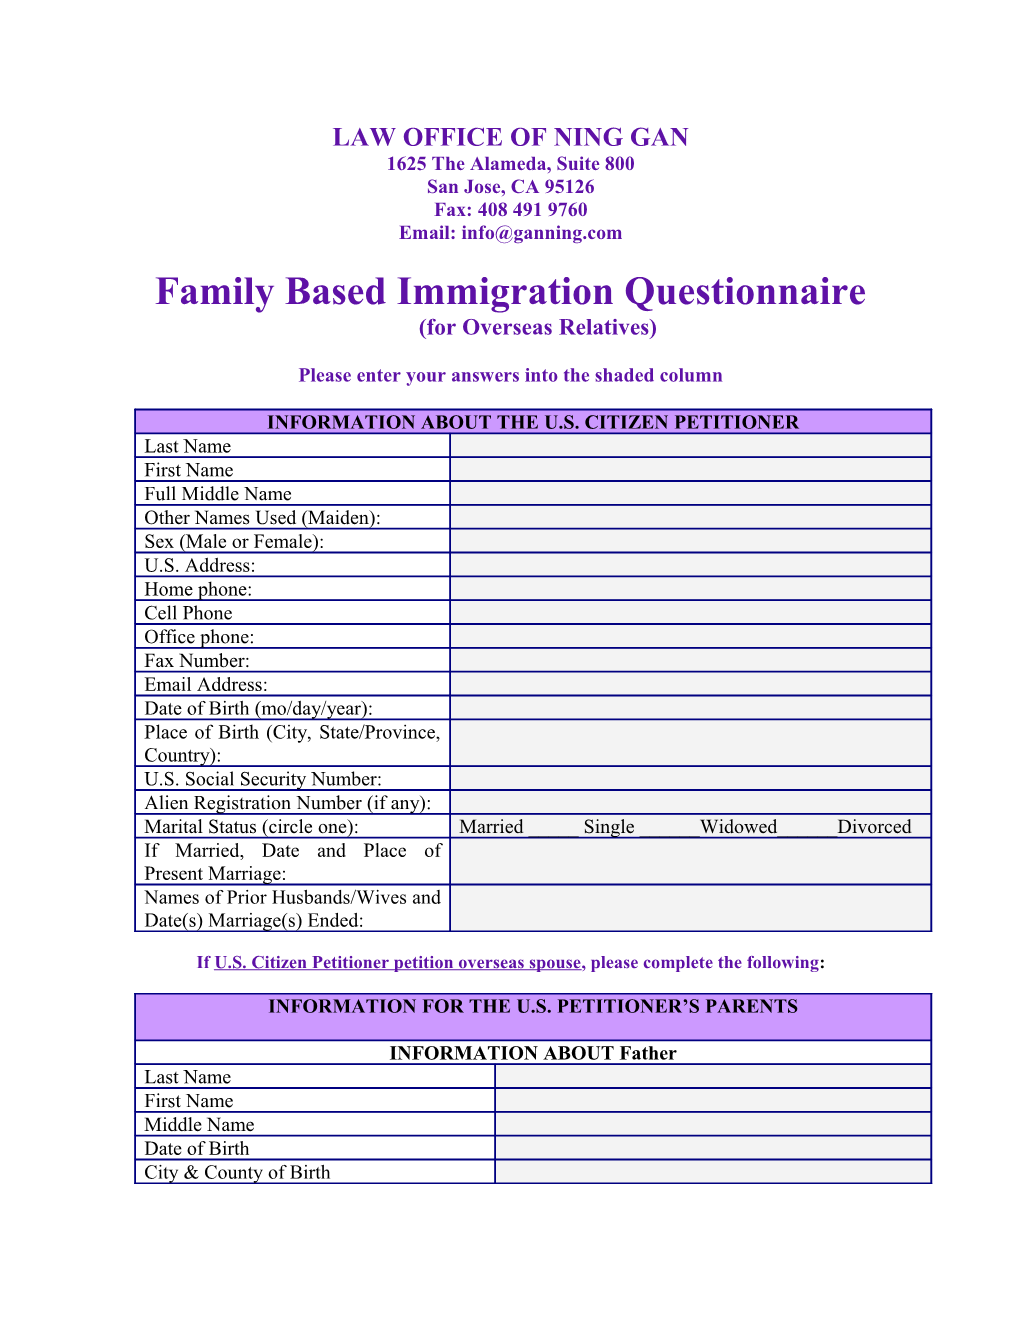 Family Based Immigration Questionnaire